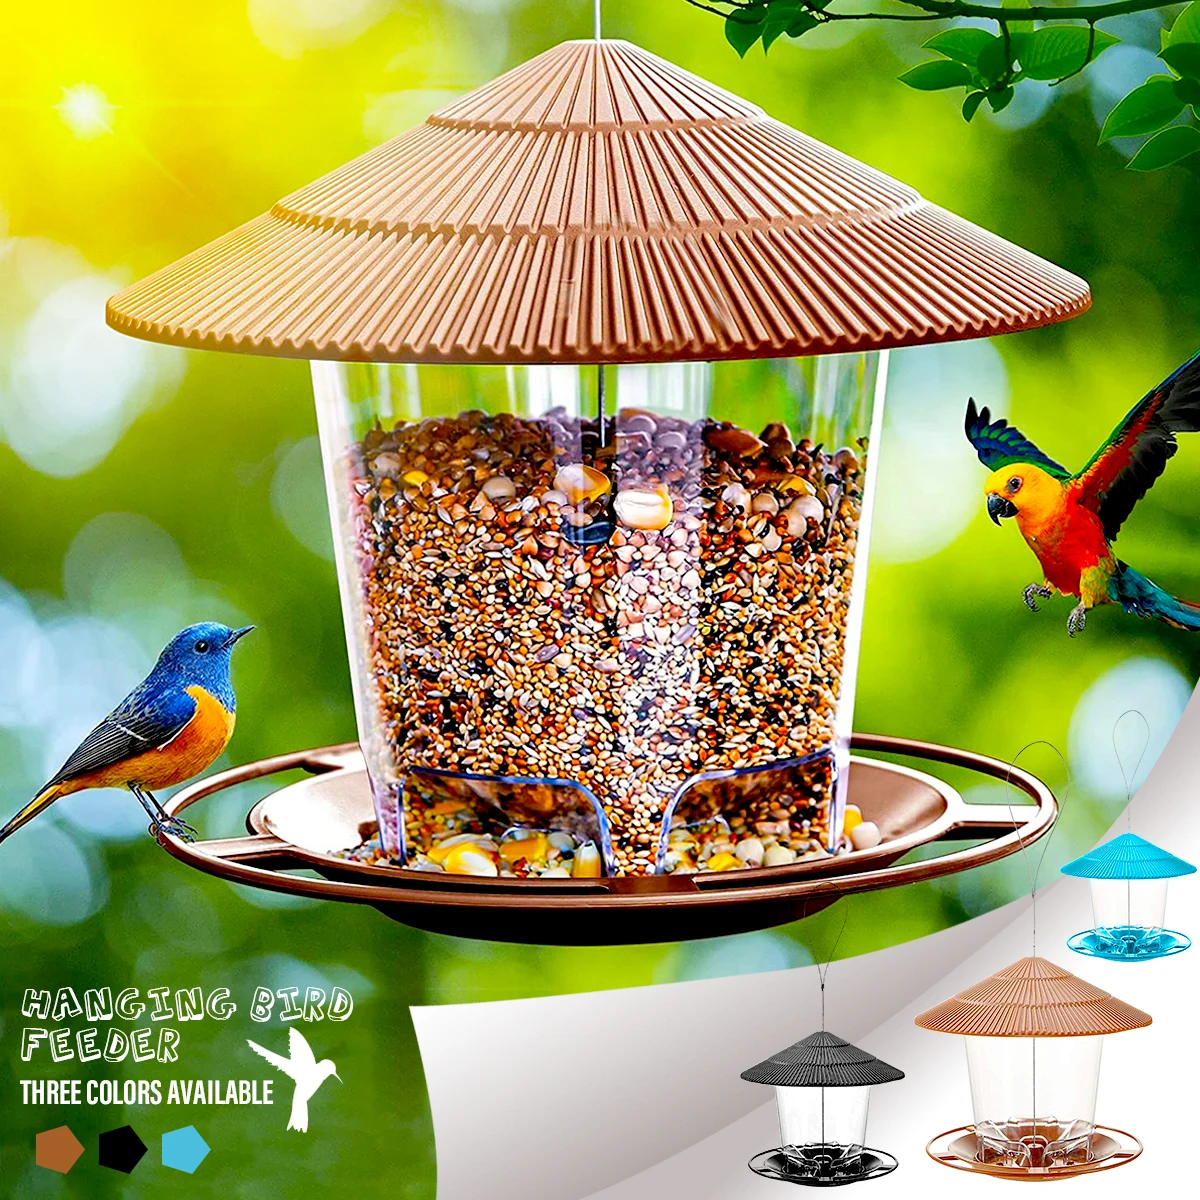 With Round Shaped Roof Waterproof Squirrel Proof Bird Feeder